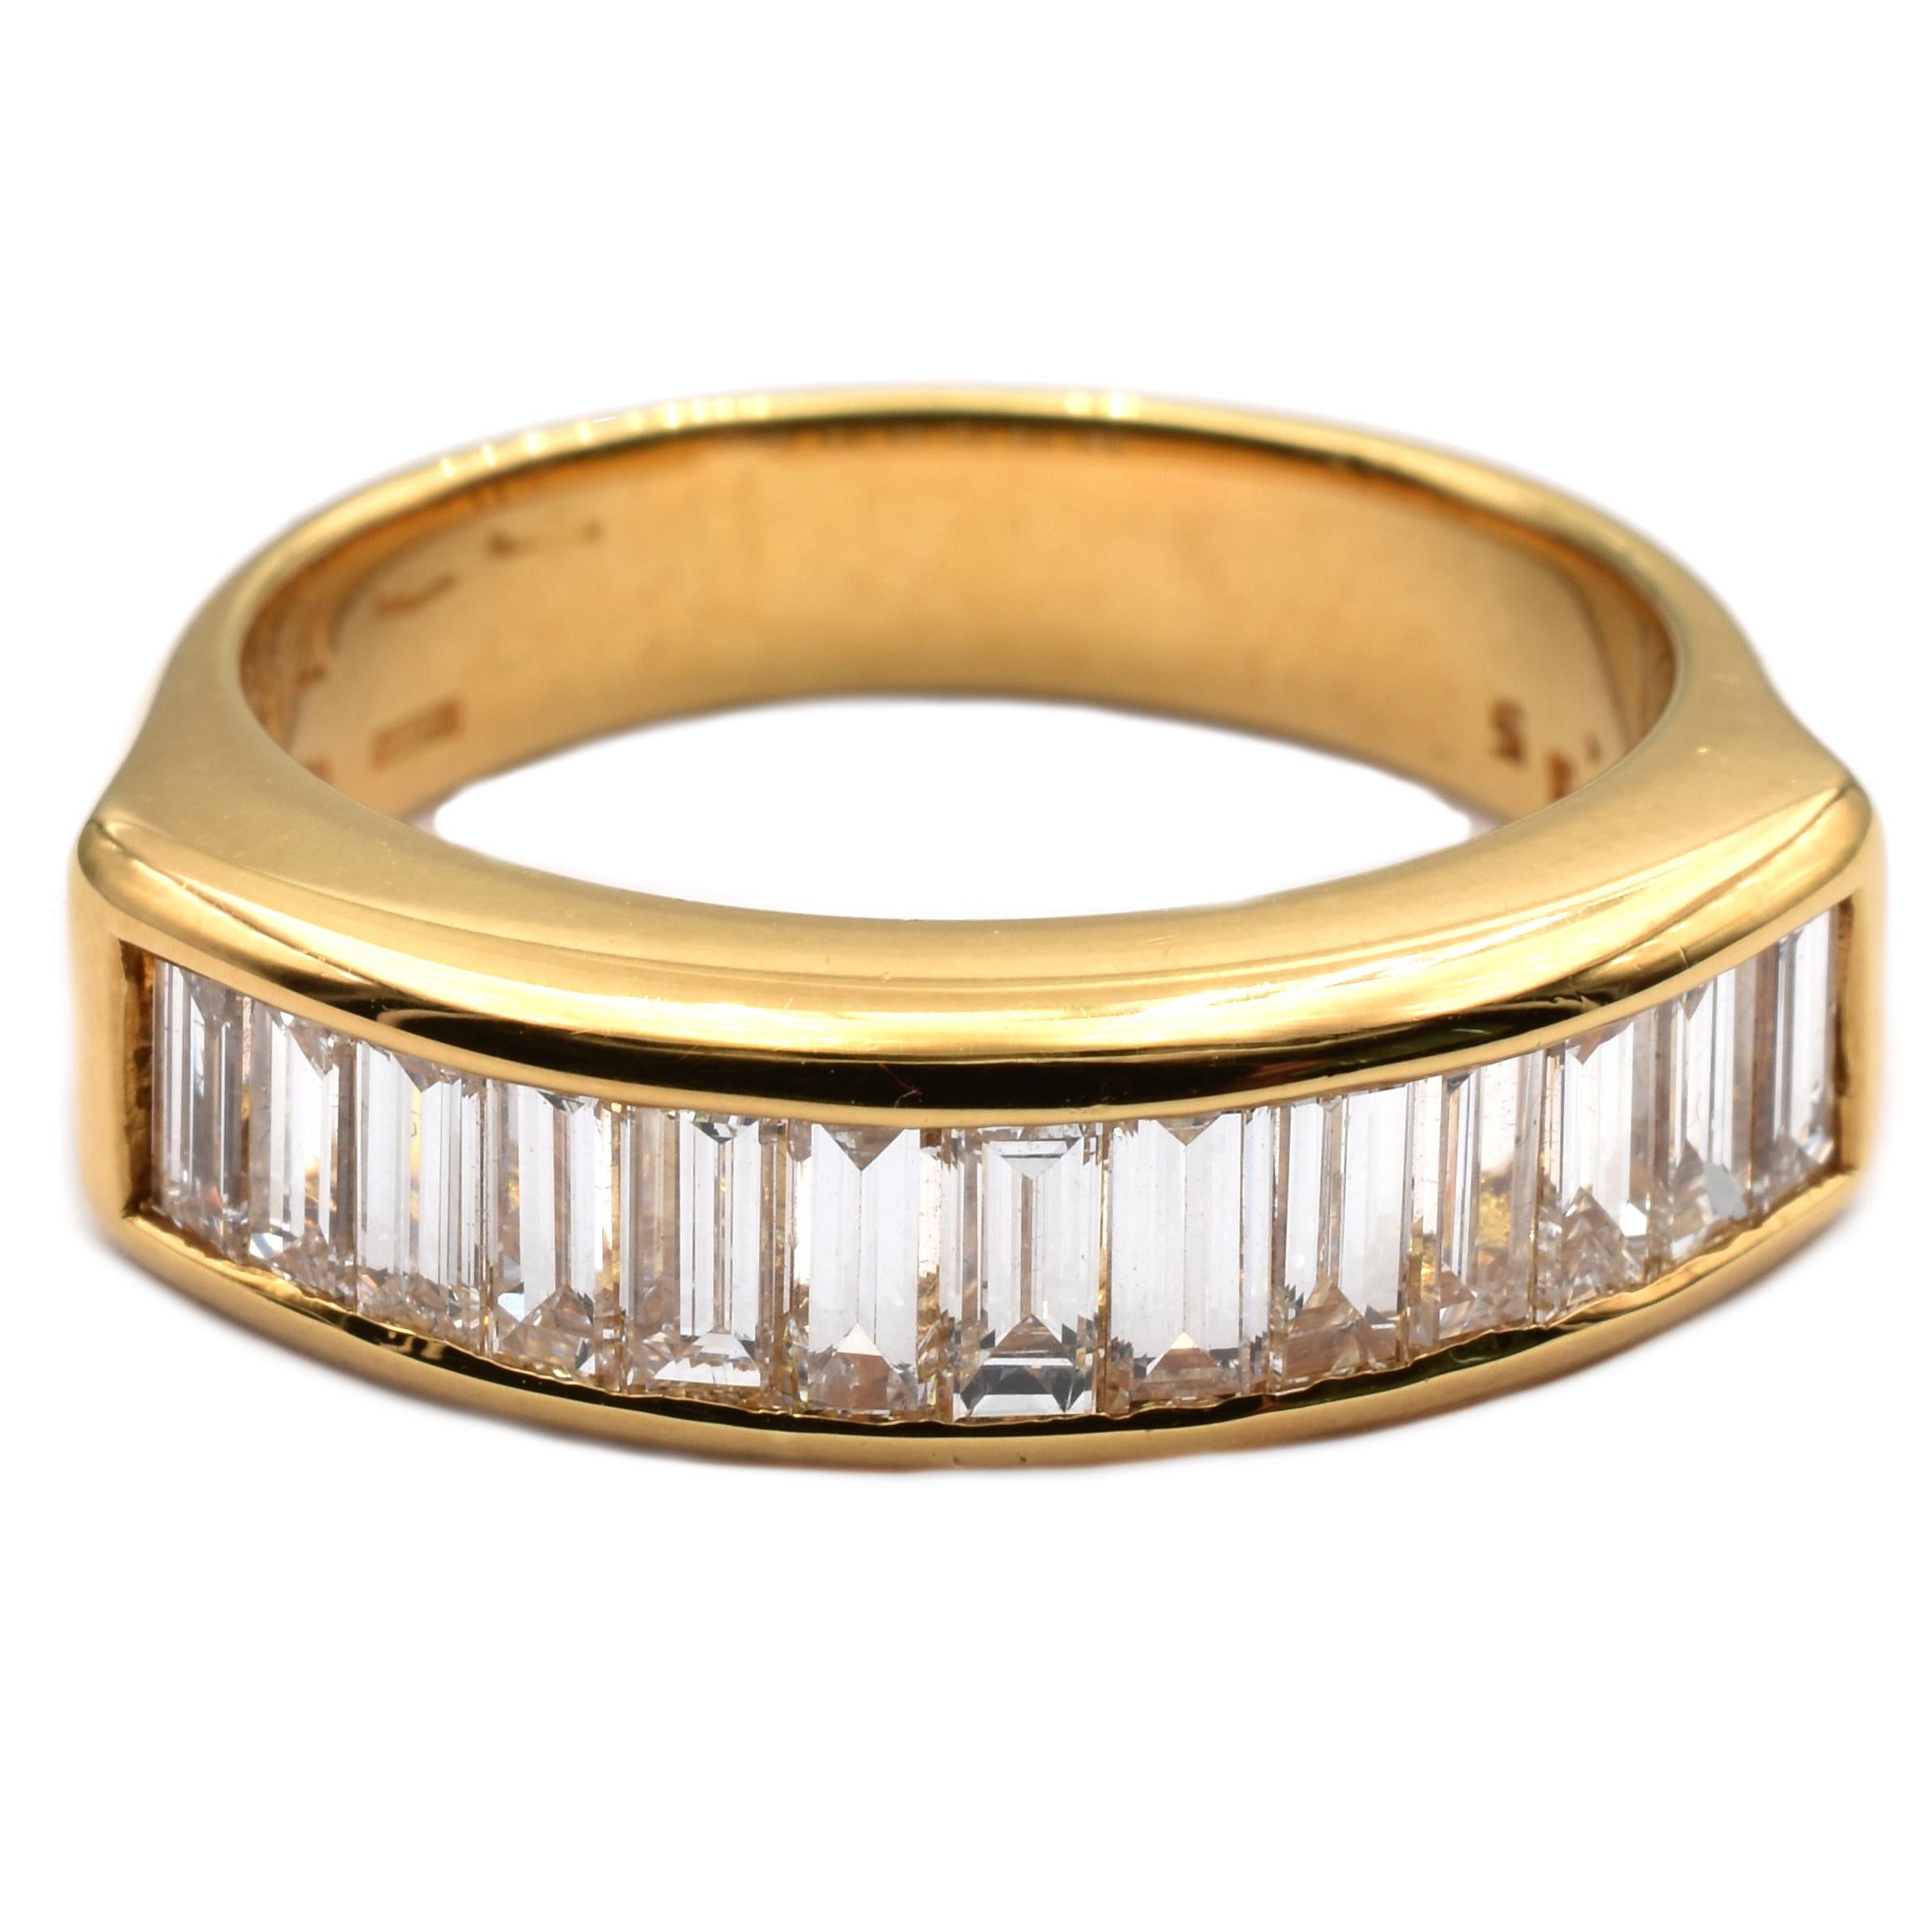 Gilberto Cassola 18Kt Yellow Gold Ring with Baguette Diamonds.
Handmade in Italy in Our Athelier in Valenza (AL).
18Kt Gold g 8,20
F Color VVS Clarity Baguette Diamonds Total Weight ct 1.35
This Ring is a Regular Size 53 (EU) and can be delivered in